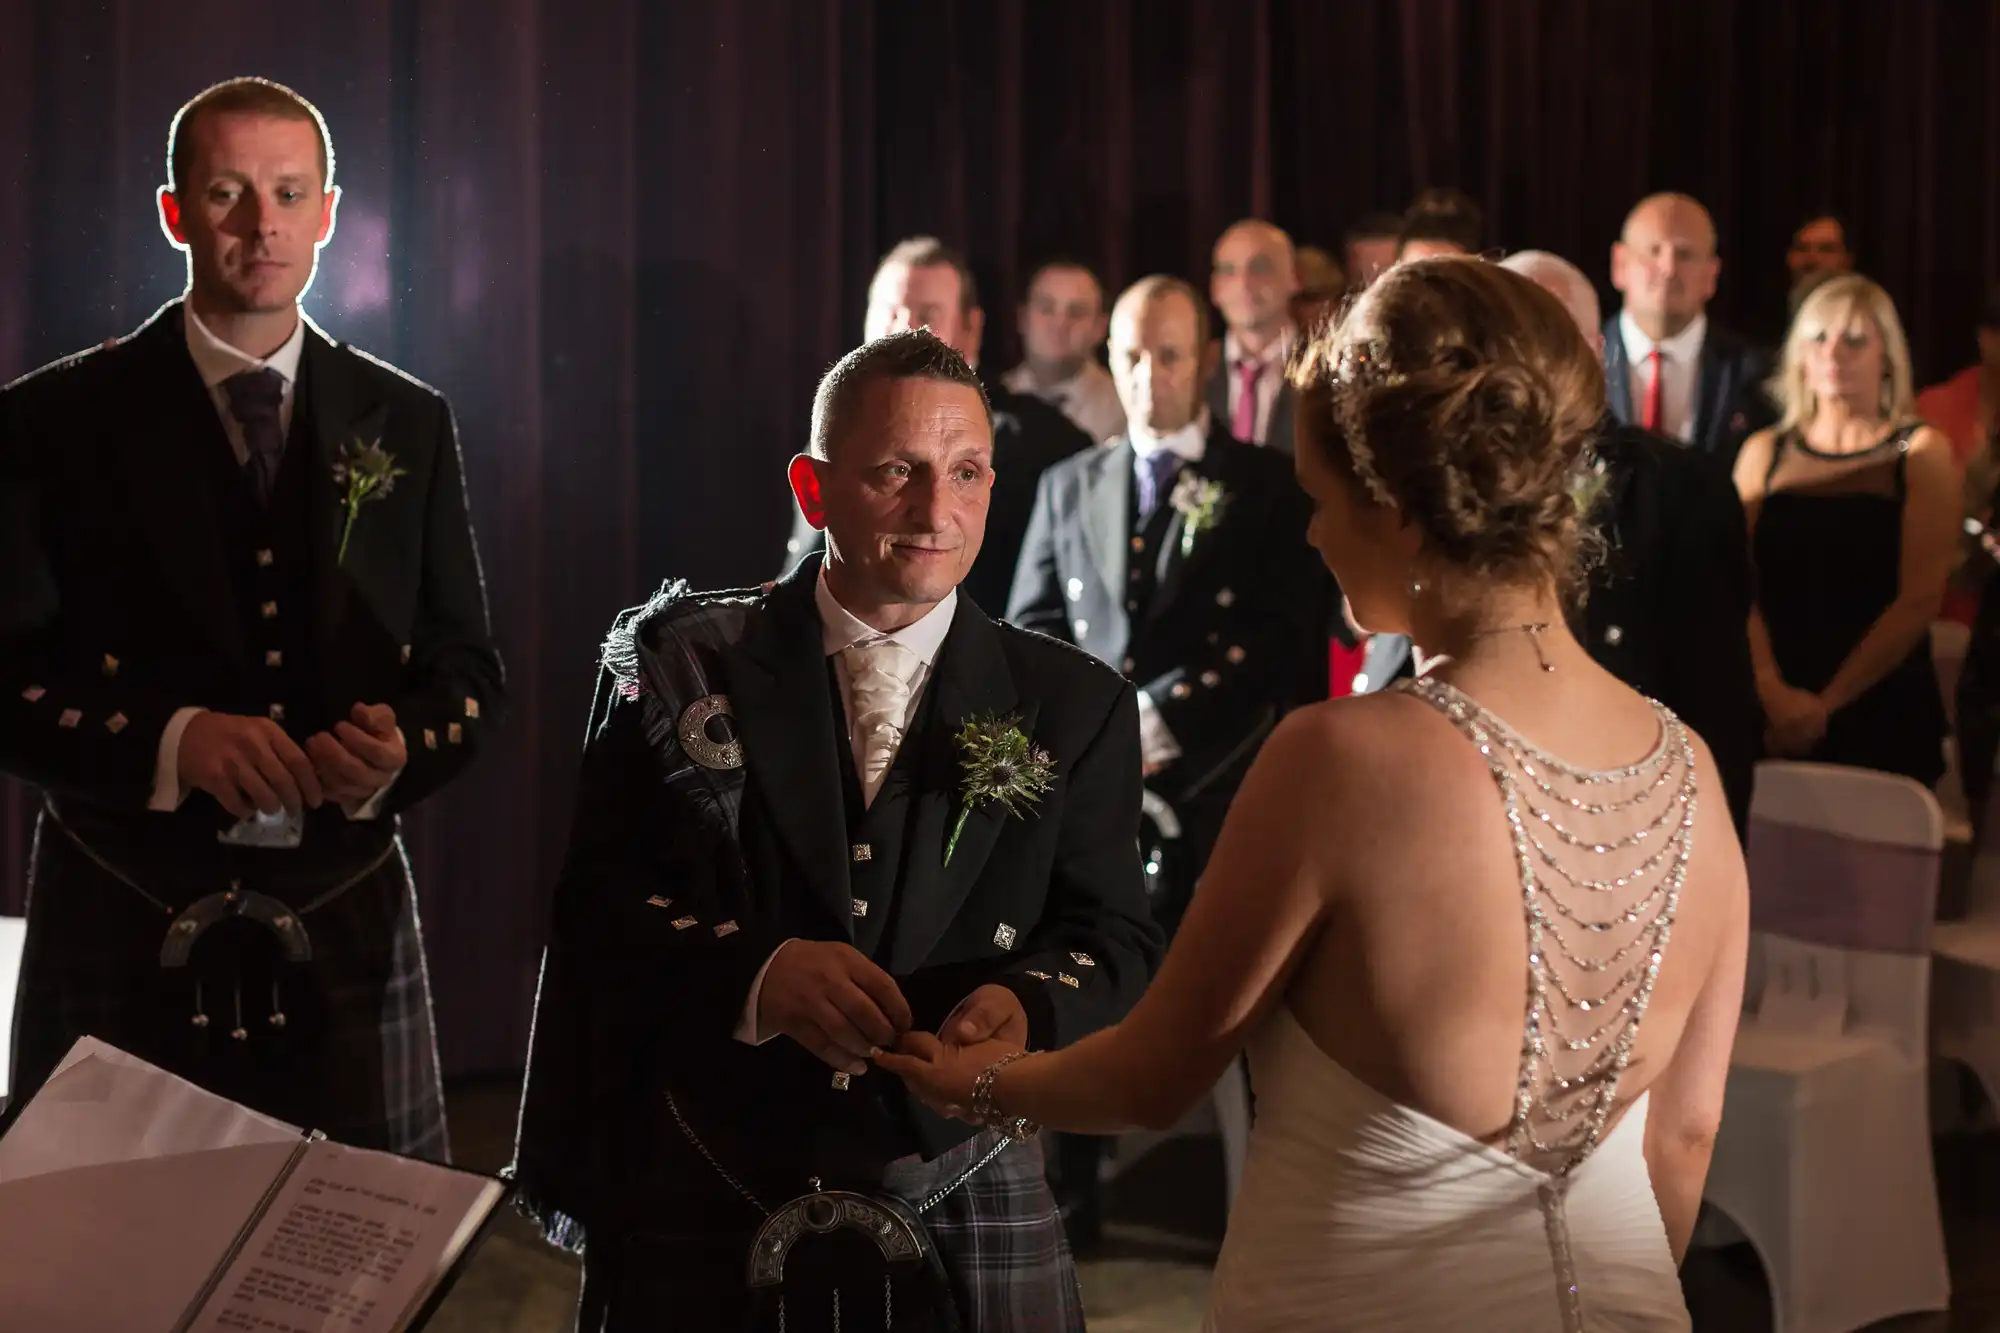 A bride and groom exchange rings at their wedding ceremony, surrounded by guests in a dimly lit room. the groom wears traditional scottish attire.